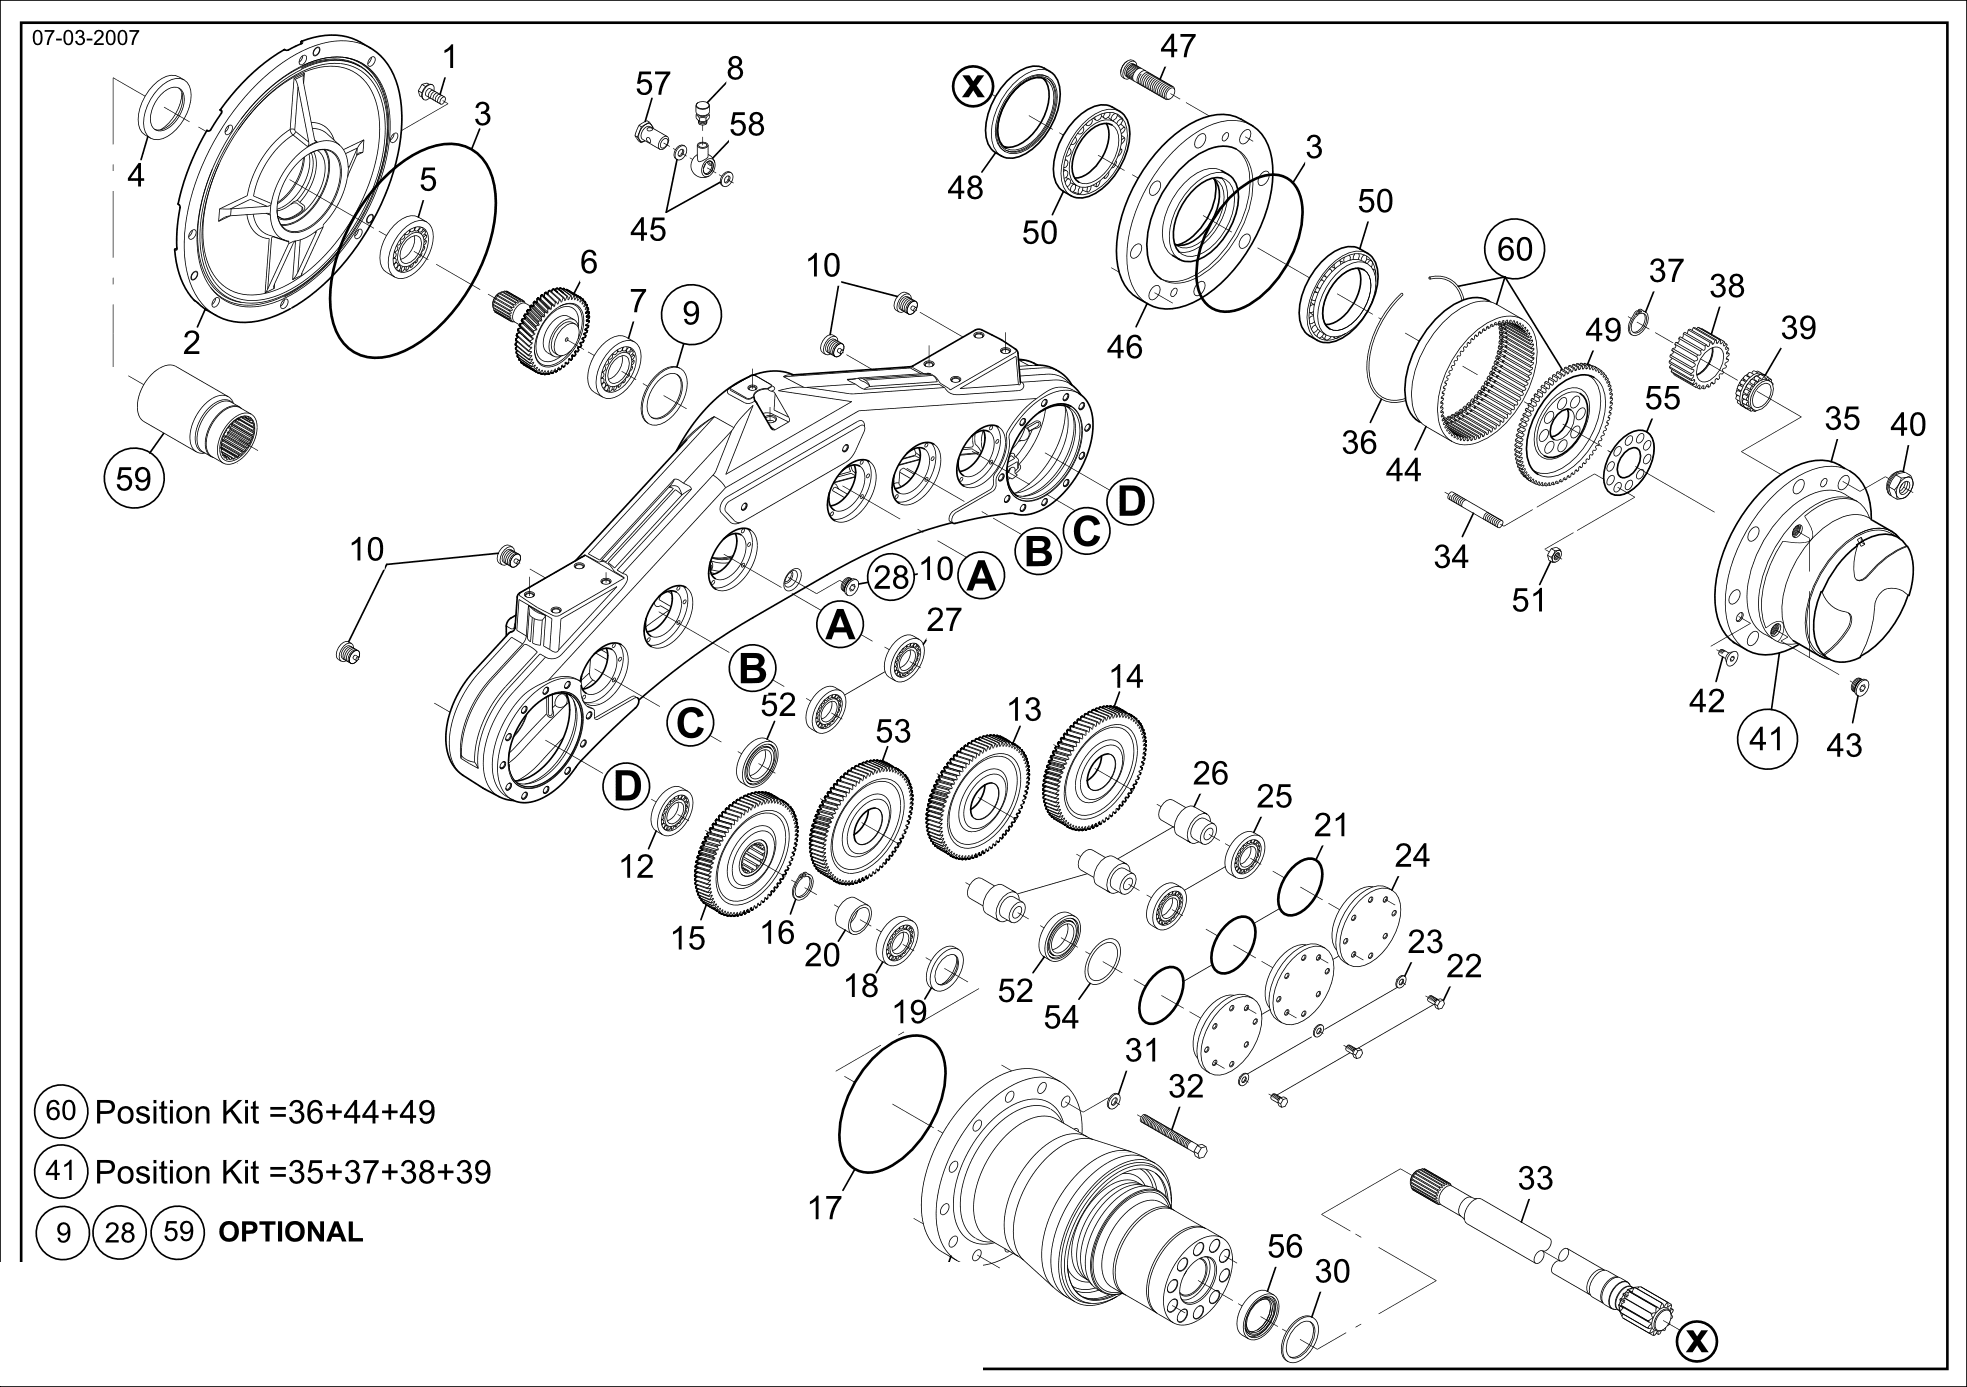 drawing for CNH NEW HOLLAND 1397 421056 - BOLT (figure 2)